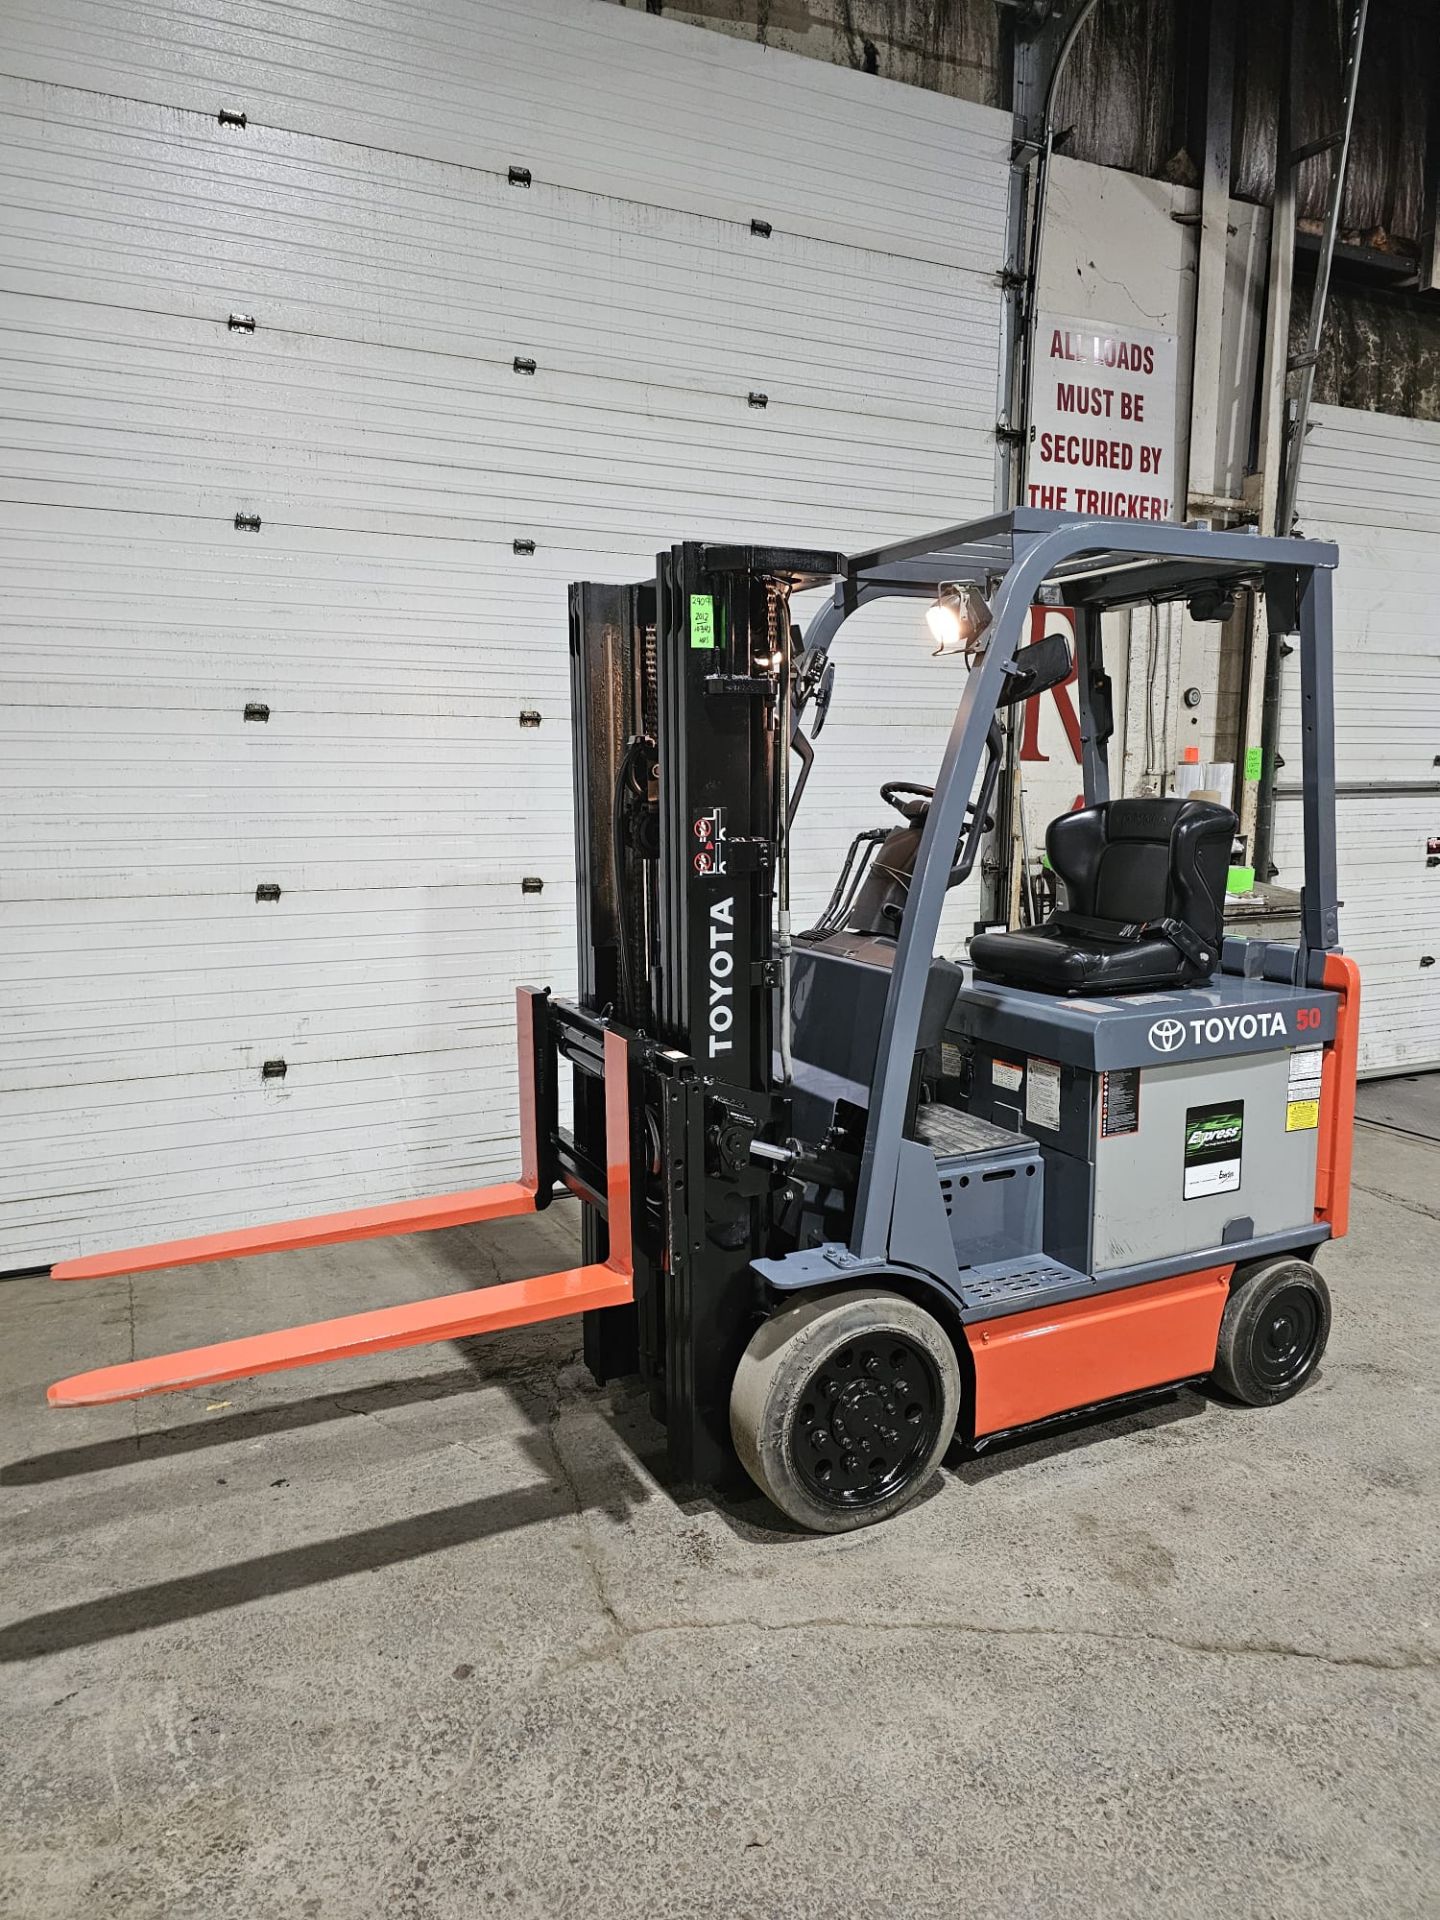 2012 TOYOTA 5,000lbs Capacity Forklift Electric 48V with sideshift with 3-STAGE MAST - FREE CUSTOMS - Image 3 of 6